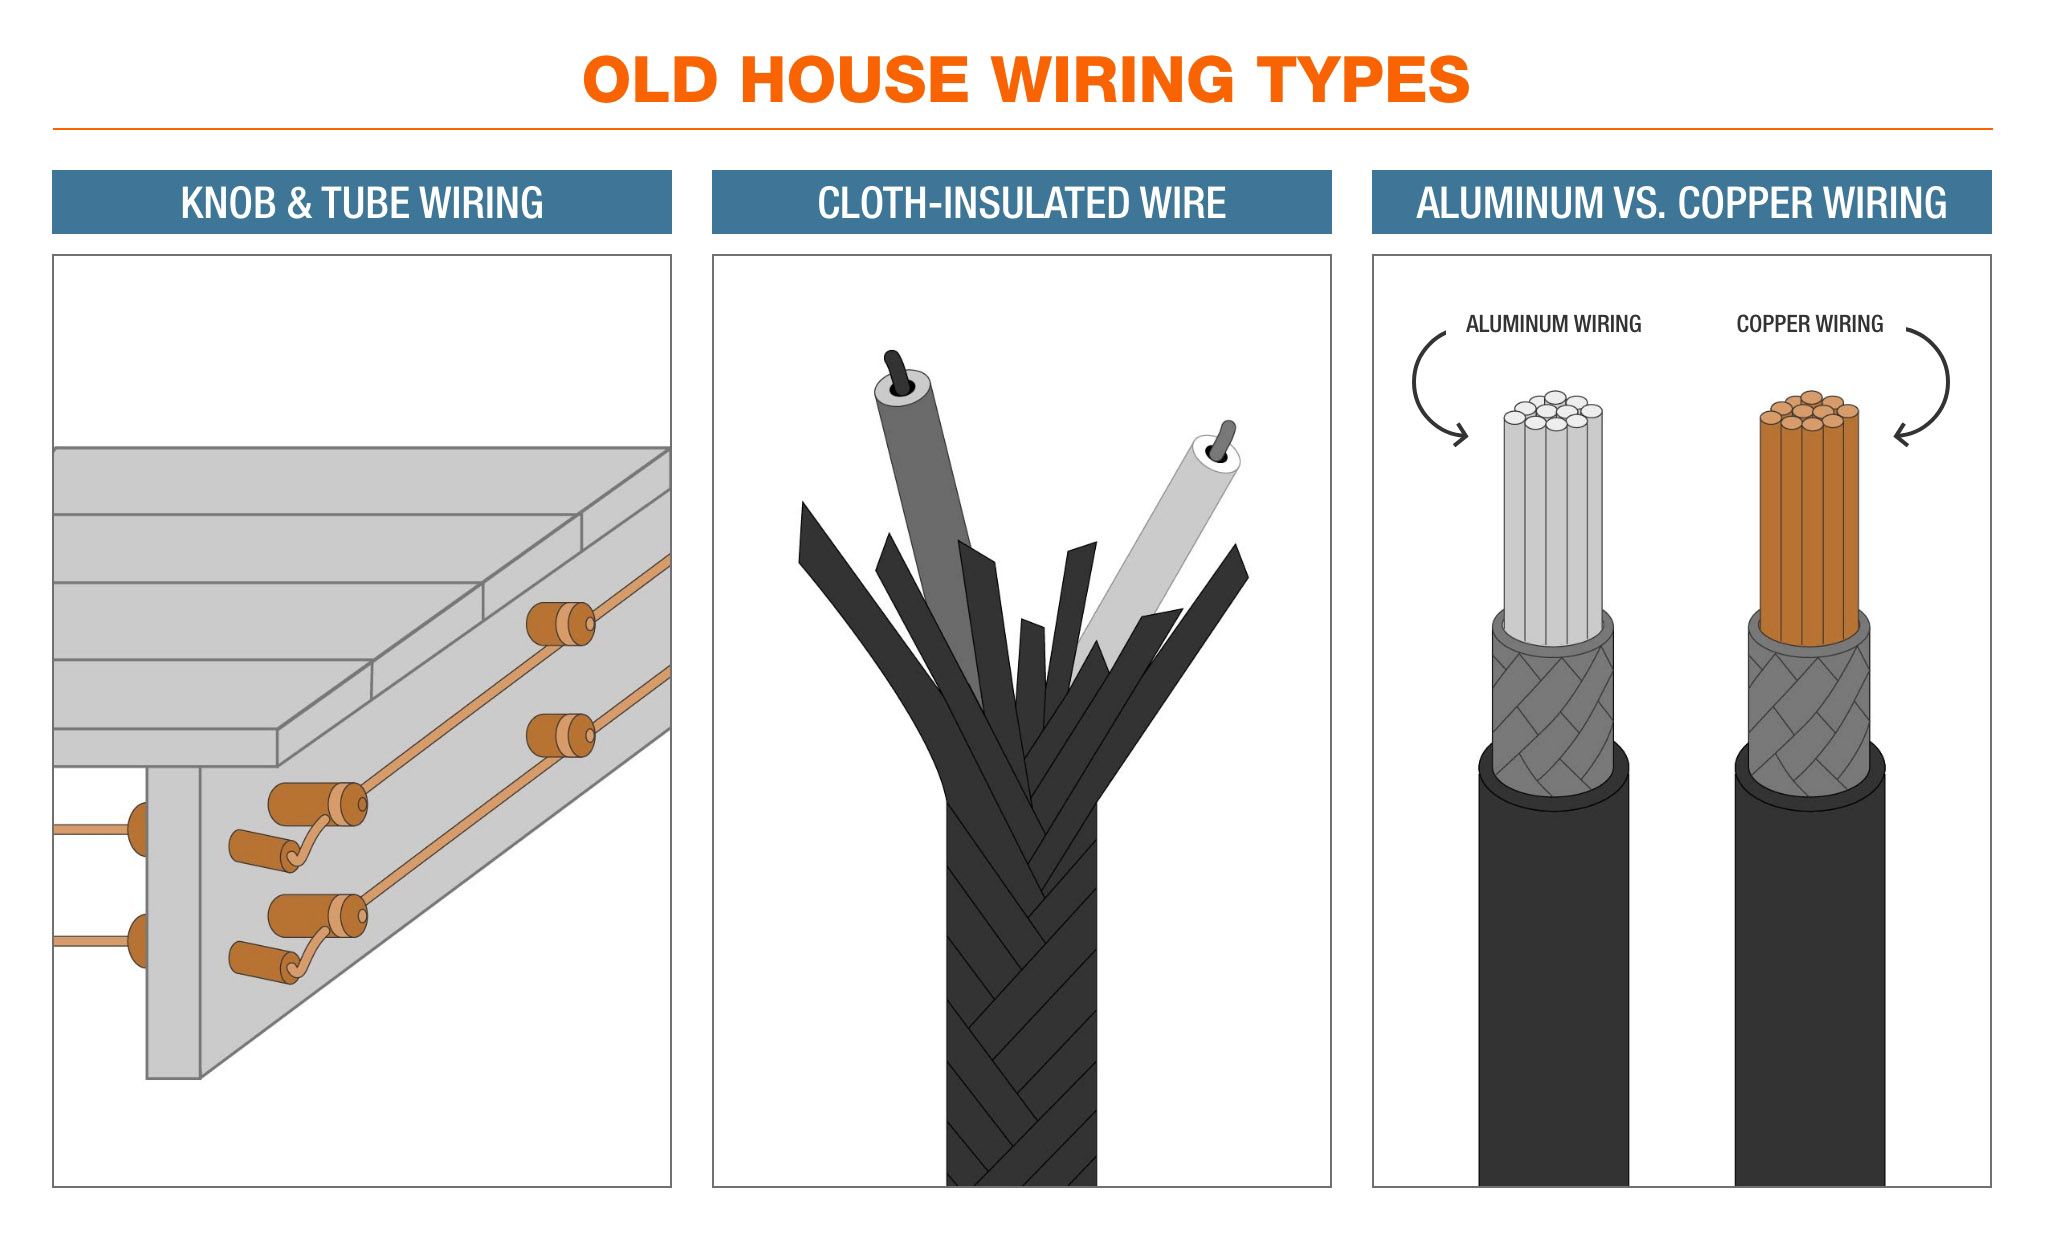 wiring - What do solid/striped lines on a wire indicate